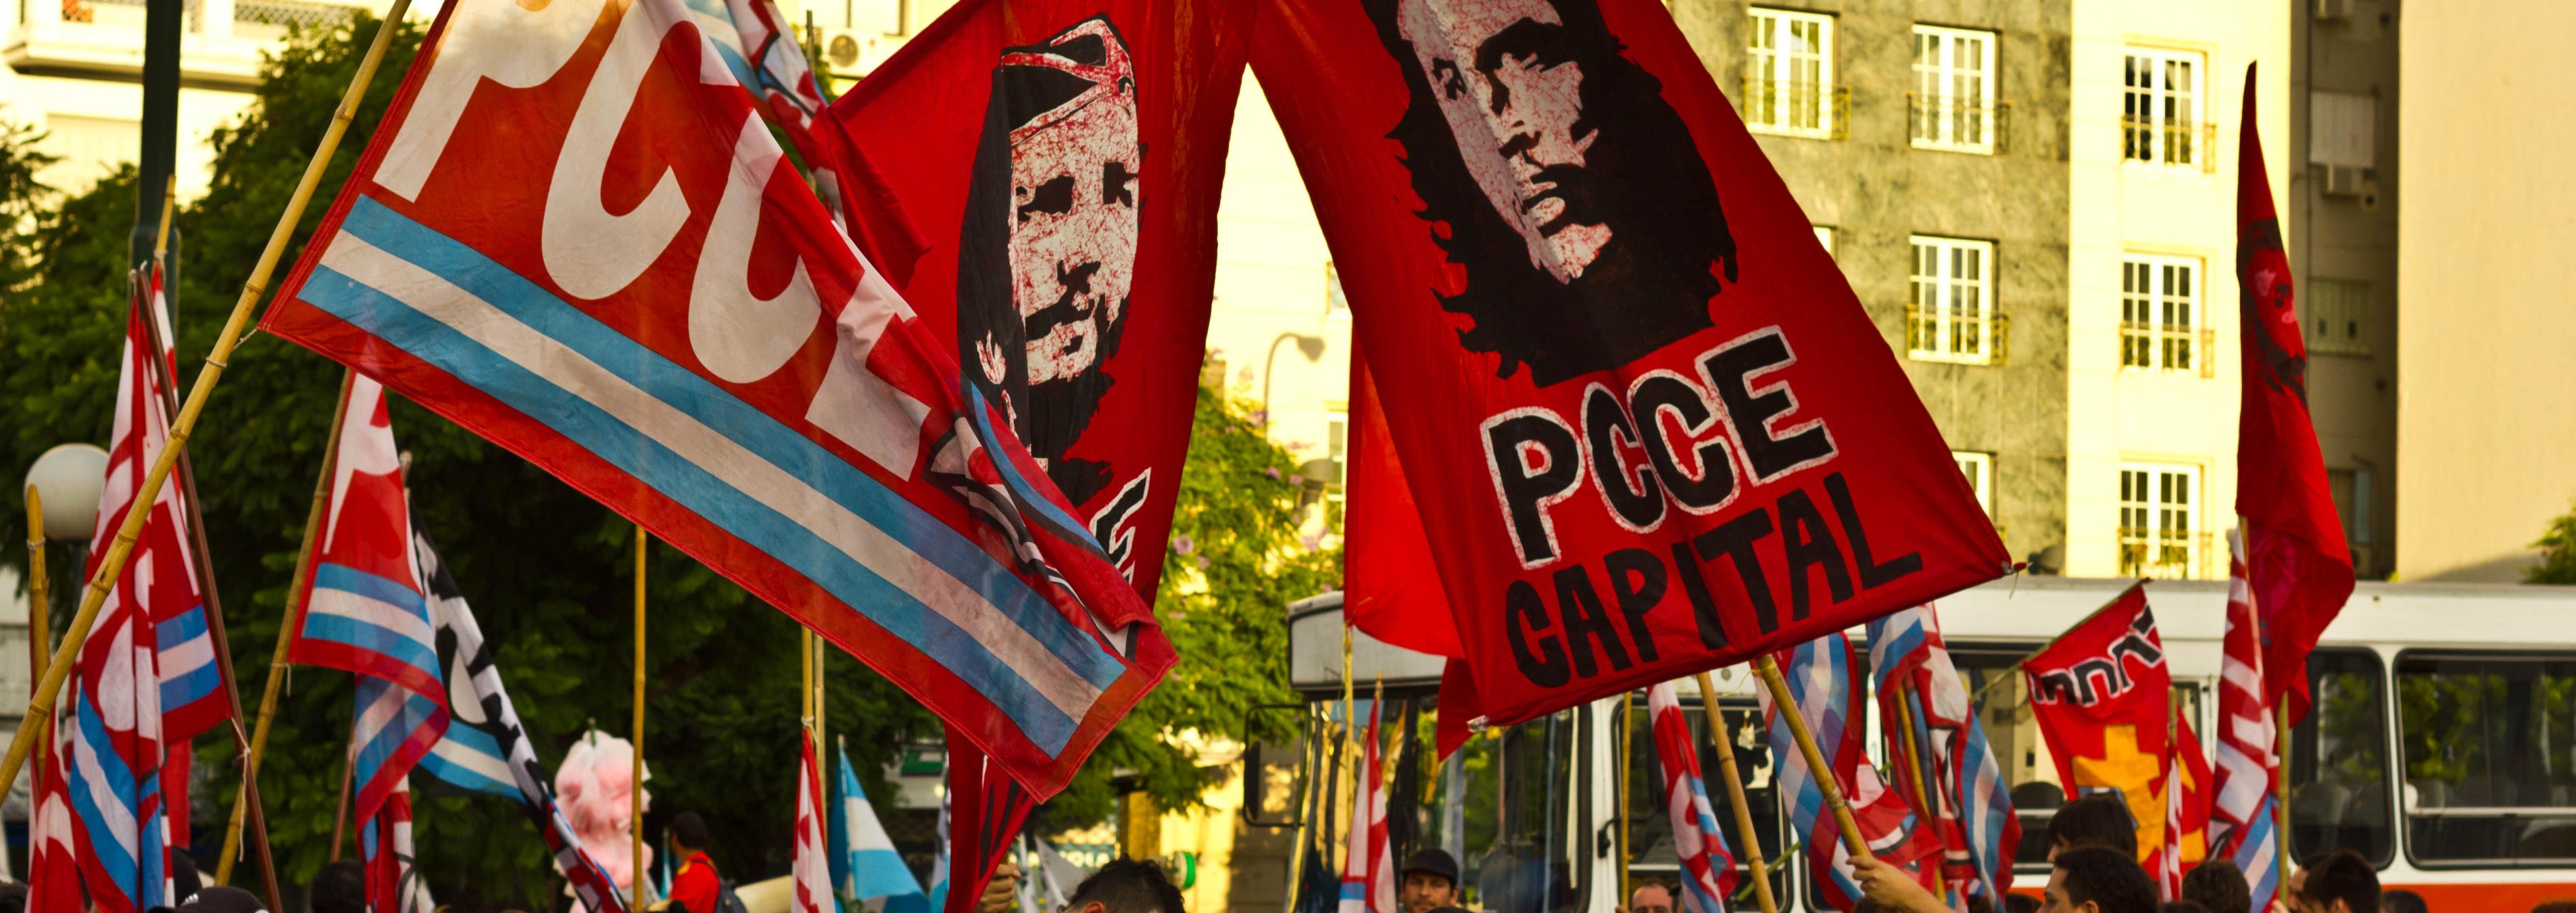 A protest featuring Che Guevara flags